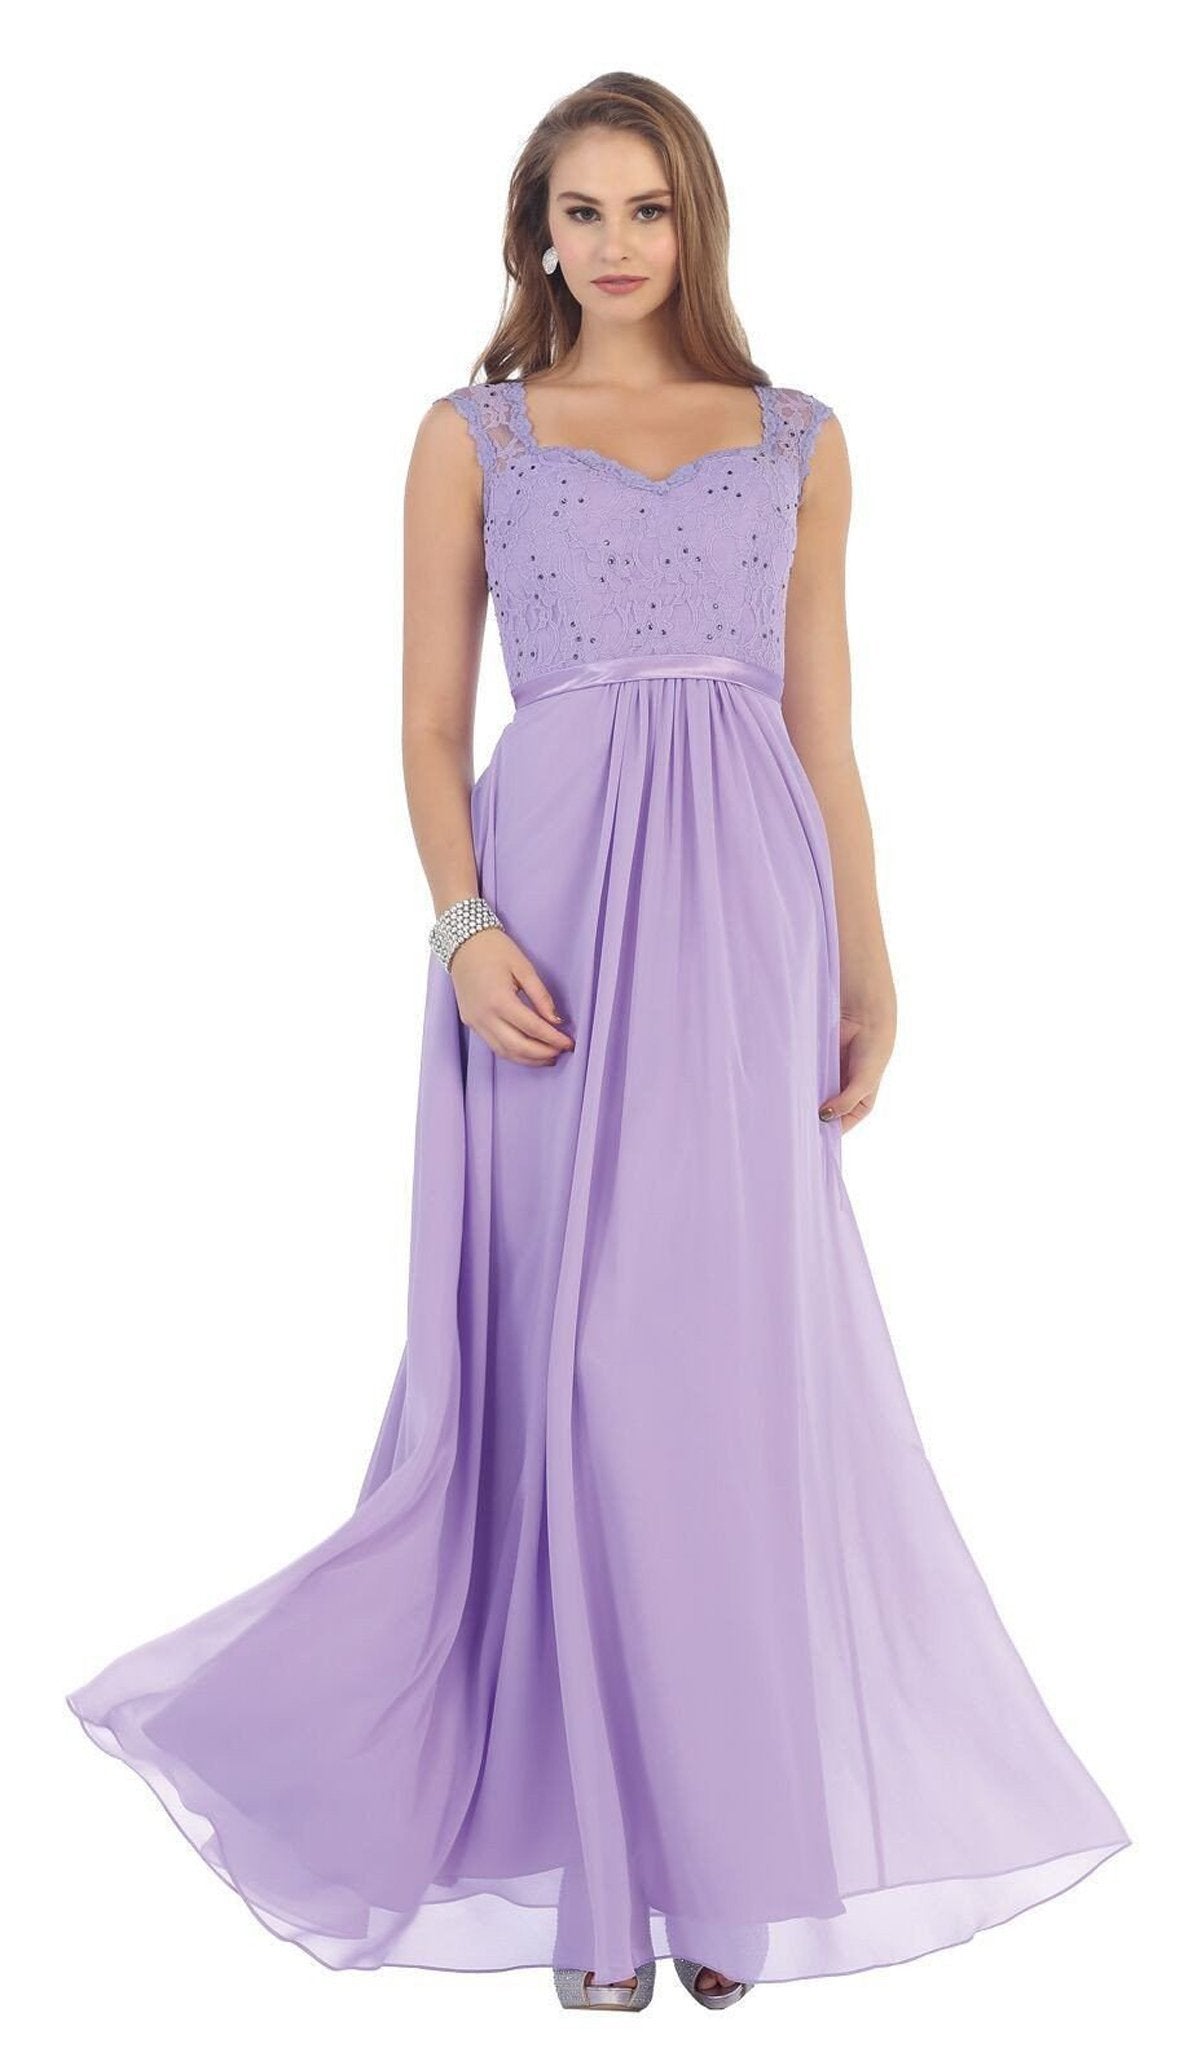 May Queen - Stunning Embellished Sweetheart Neck Chiffon A-Line Evening Dress Special Occasion Dress 4 / Lilac